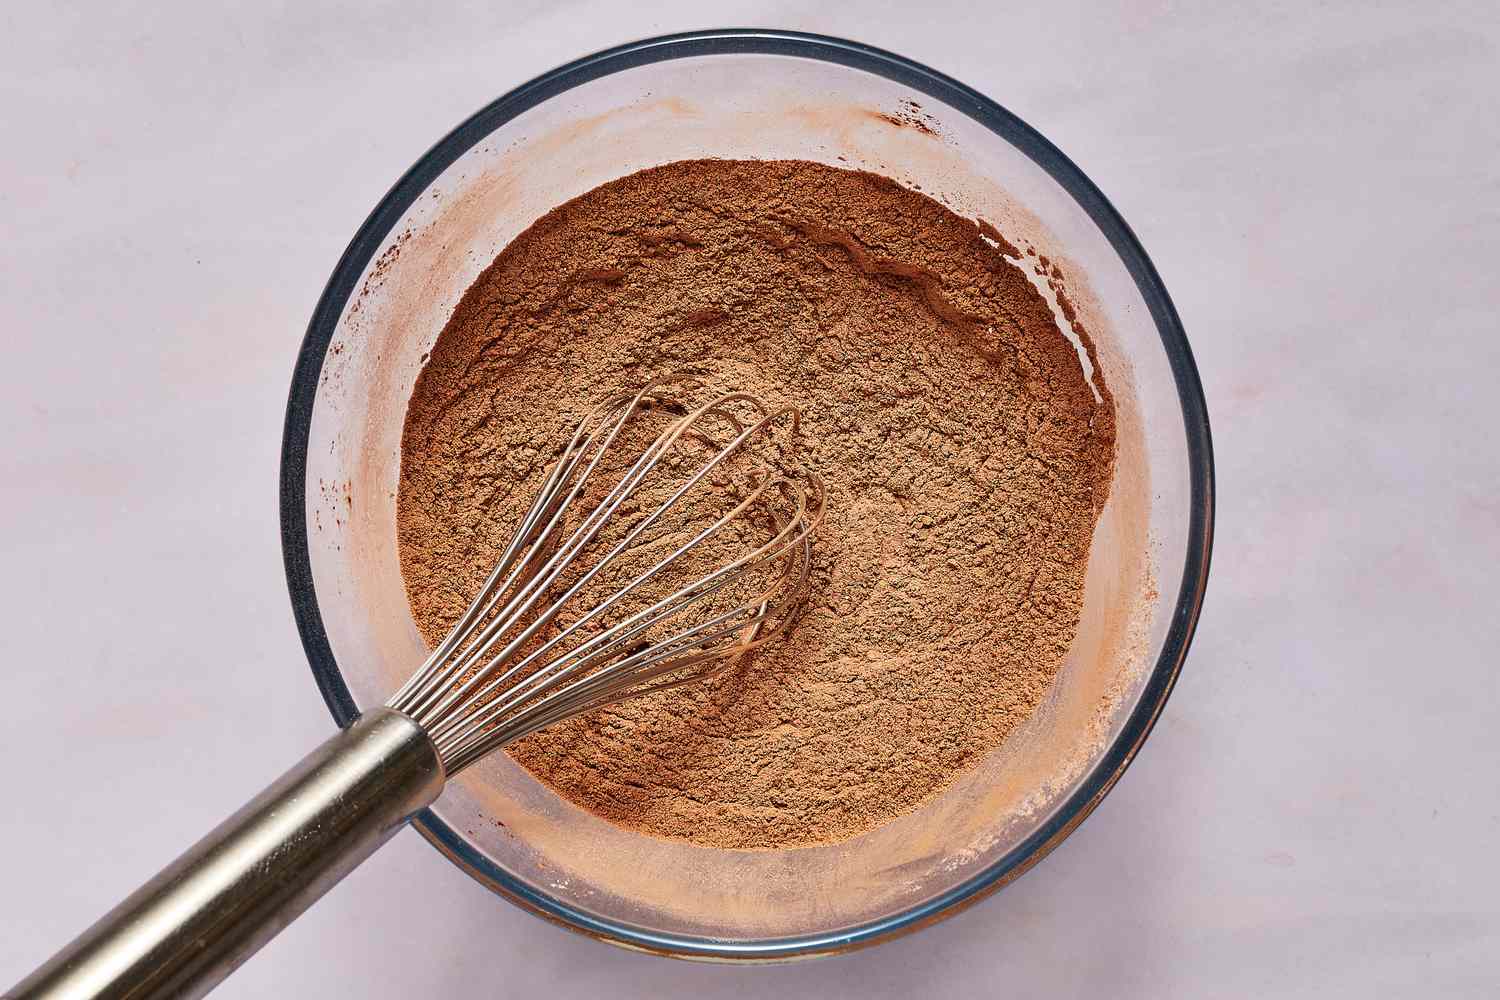 baking soda and salt whisked into cake flour and cocoa powder in bowl